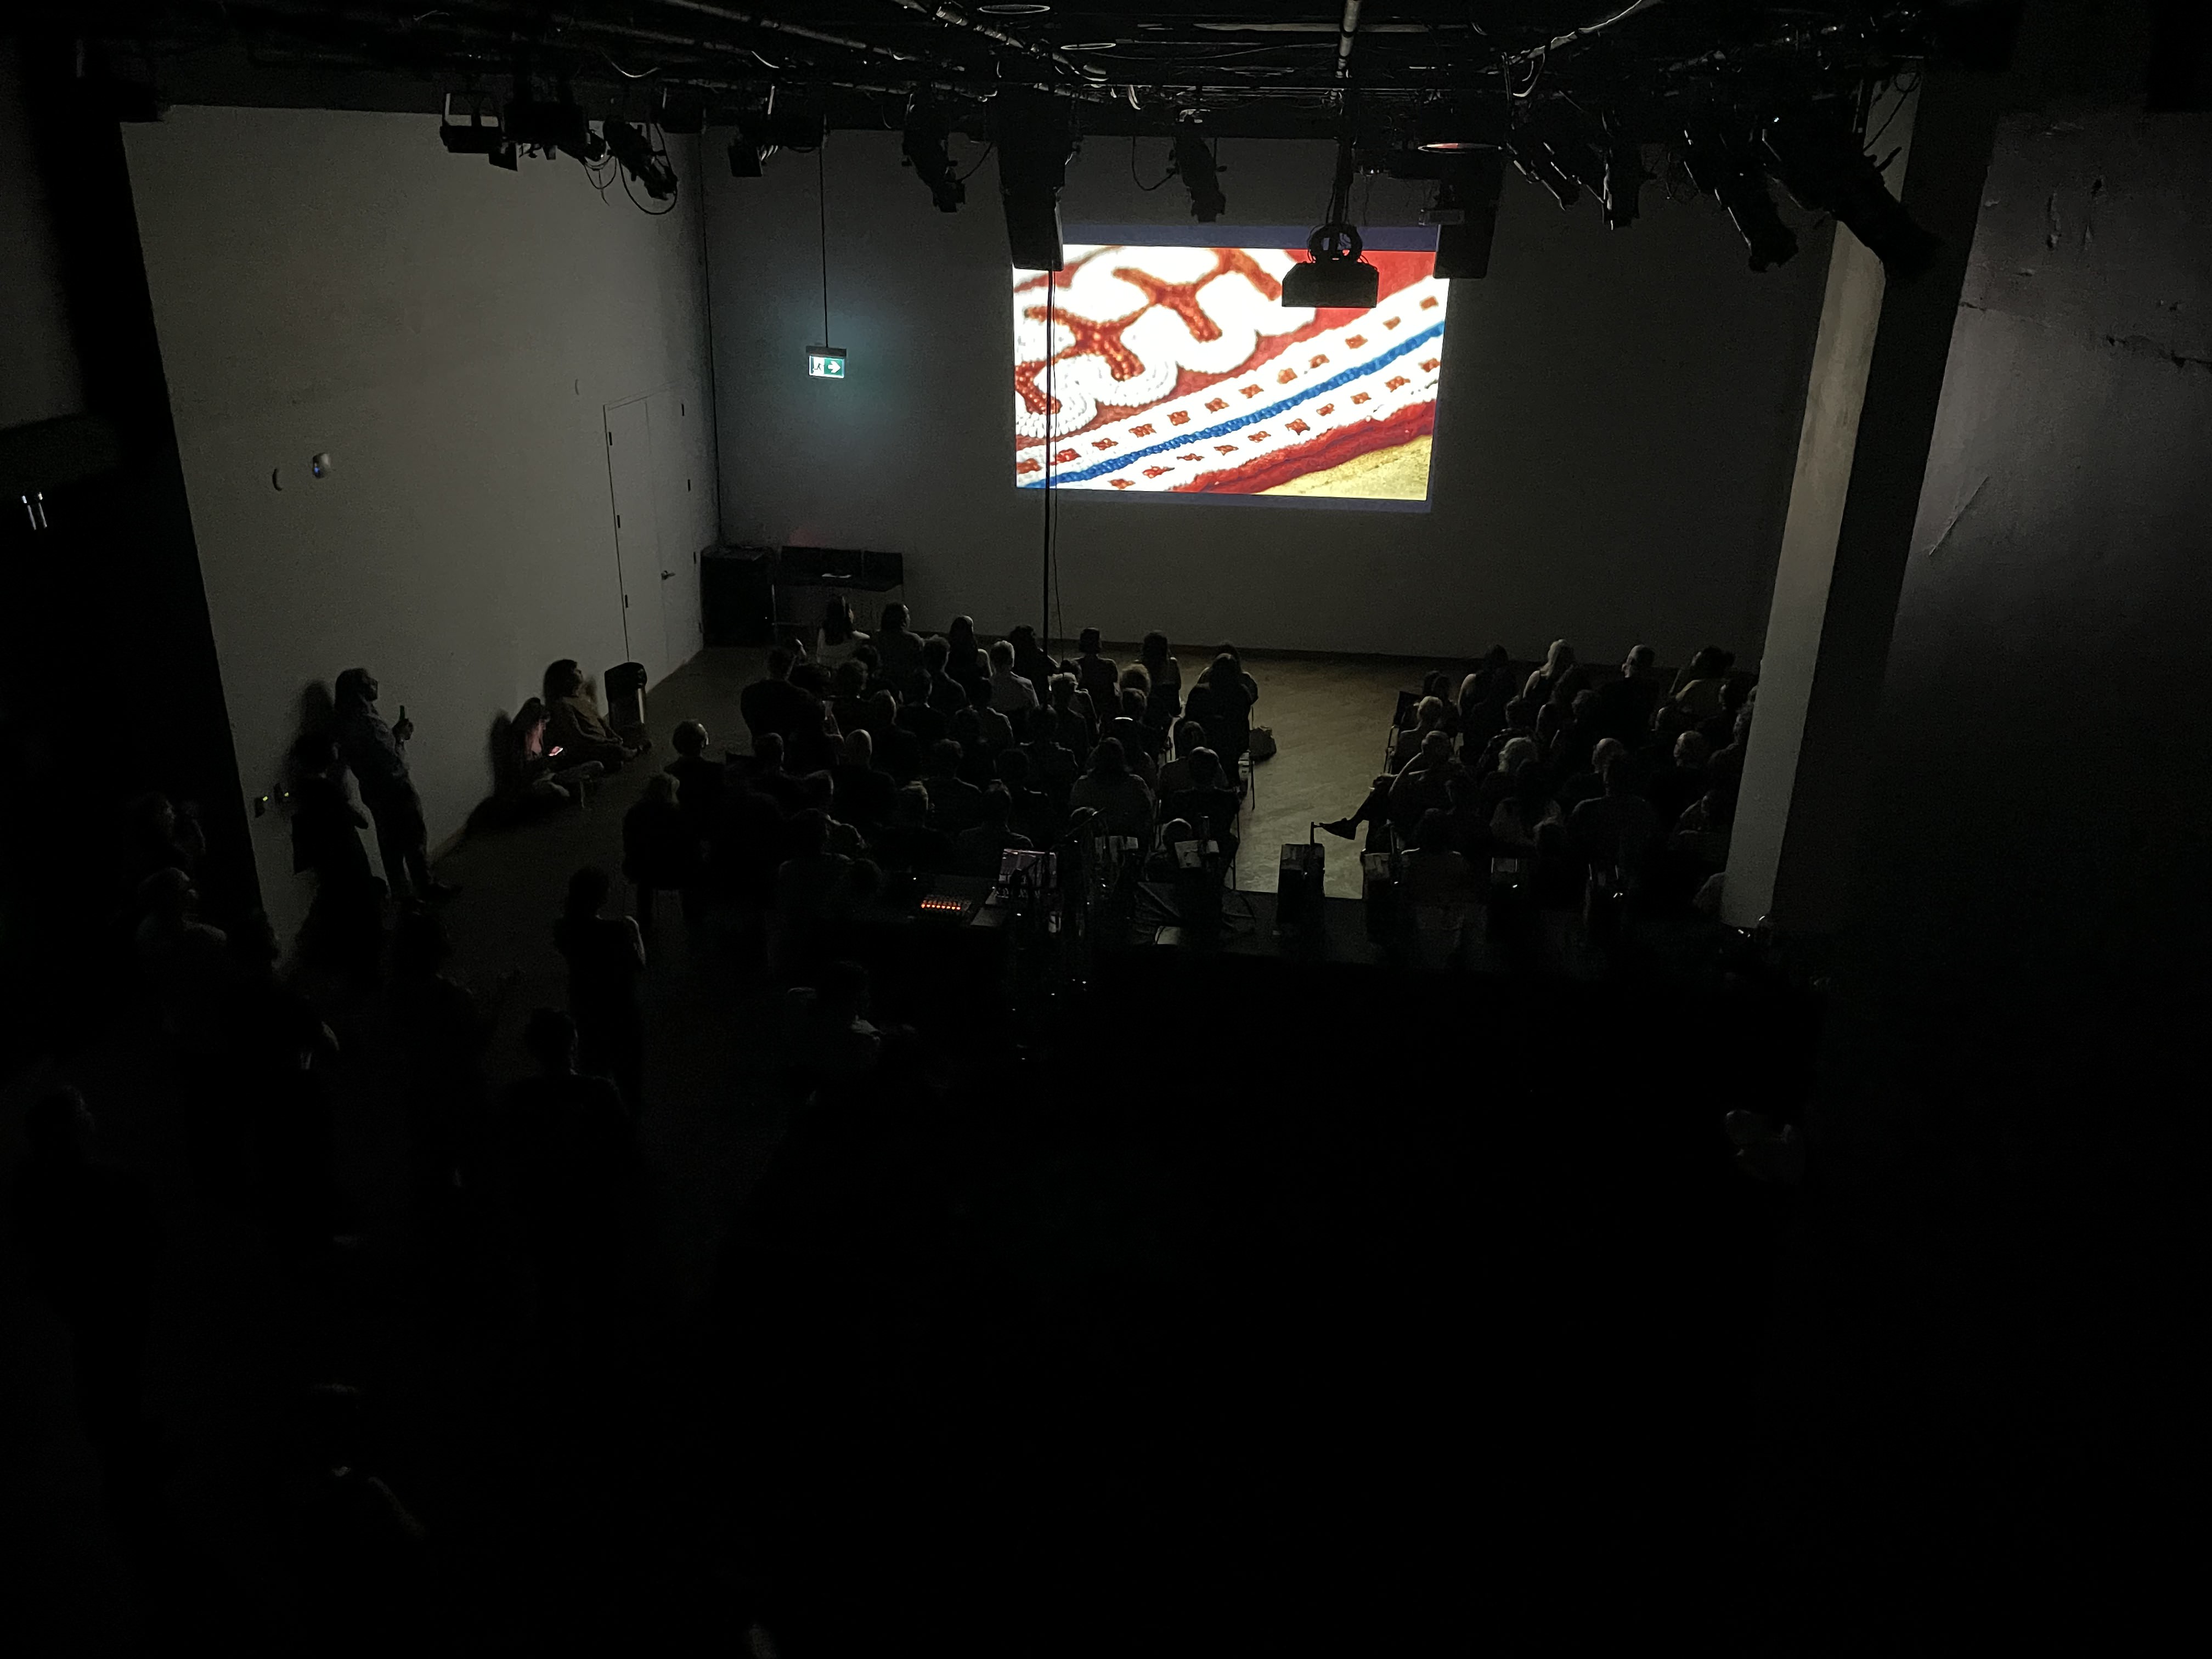 A photograph taken from a high angle of a dark venue space with lots of people sitting in a grid of chairs watching a digital projection.